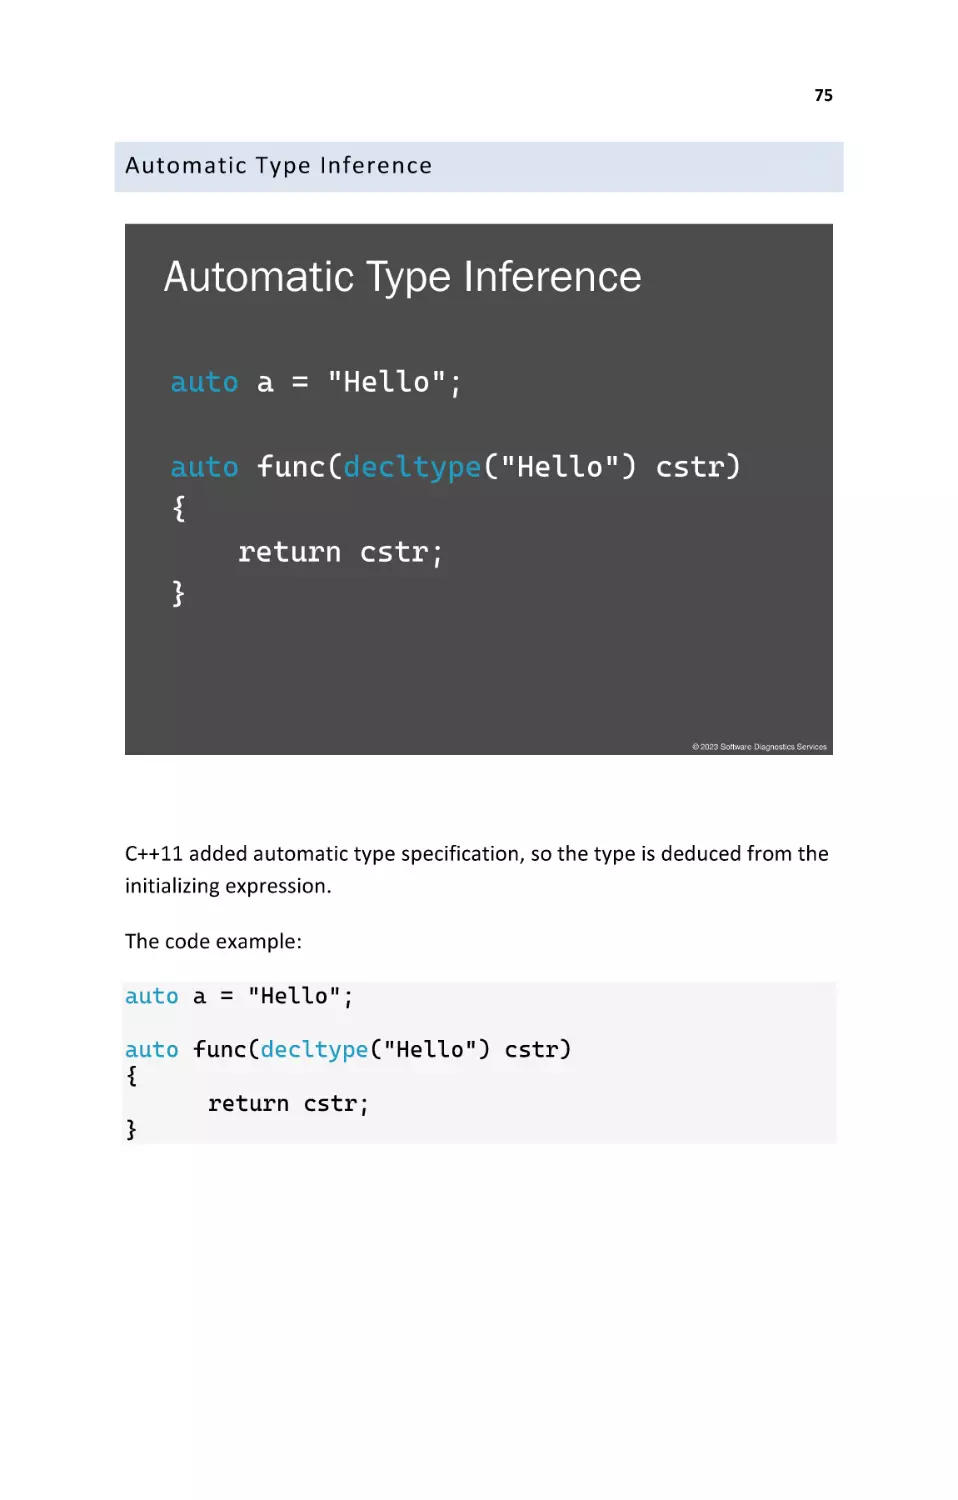 Automatic Type Inference